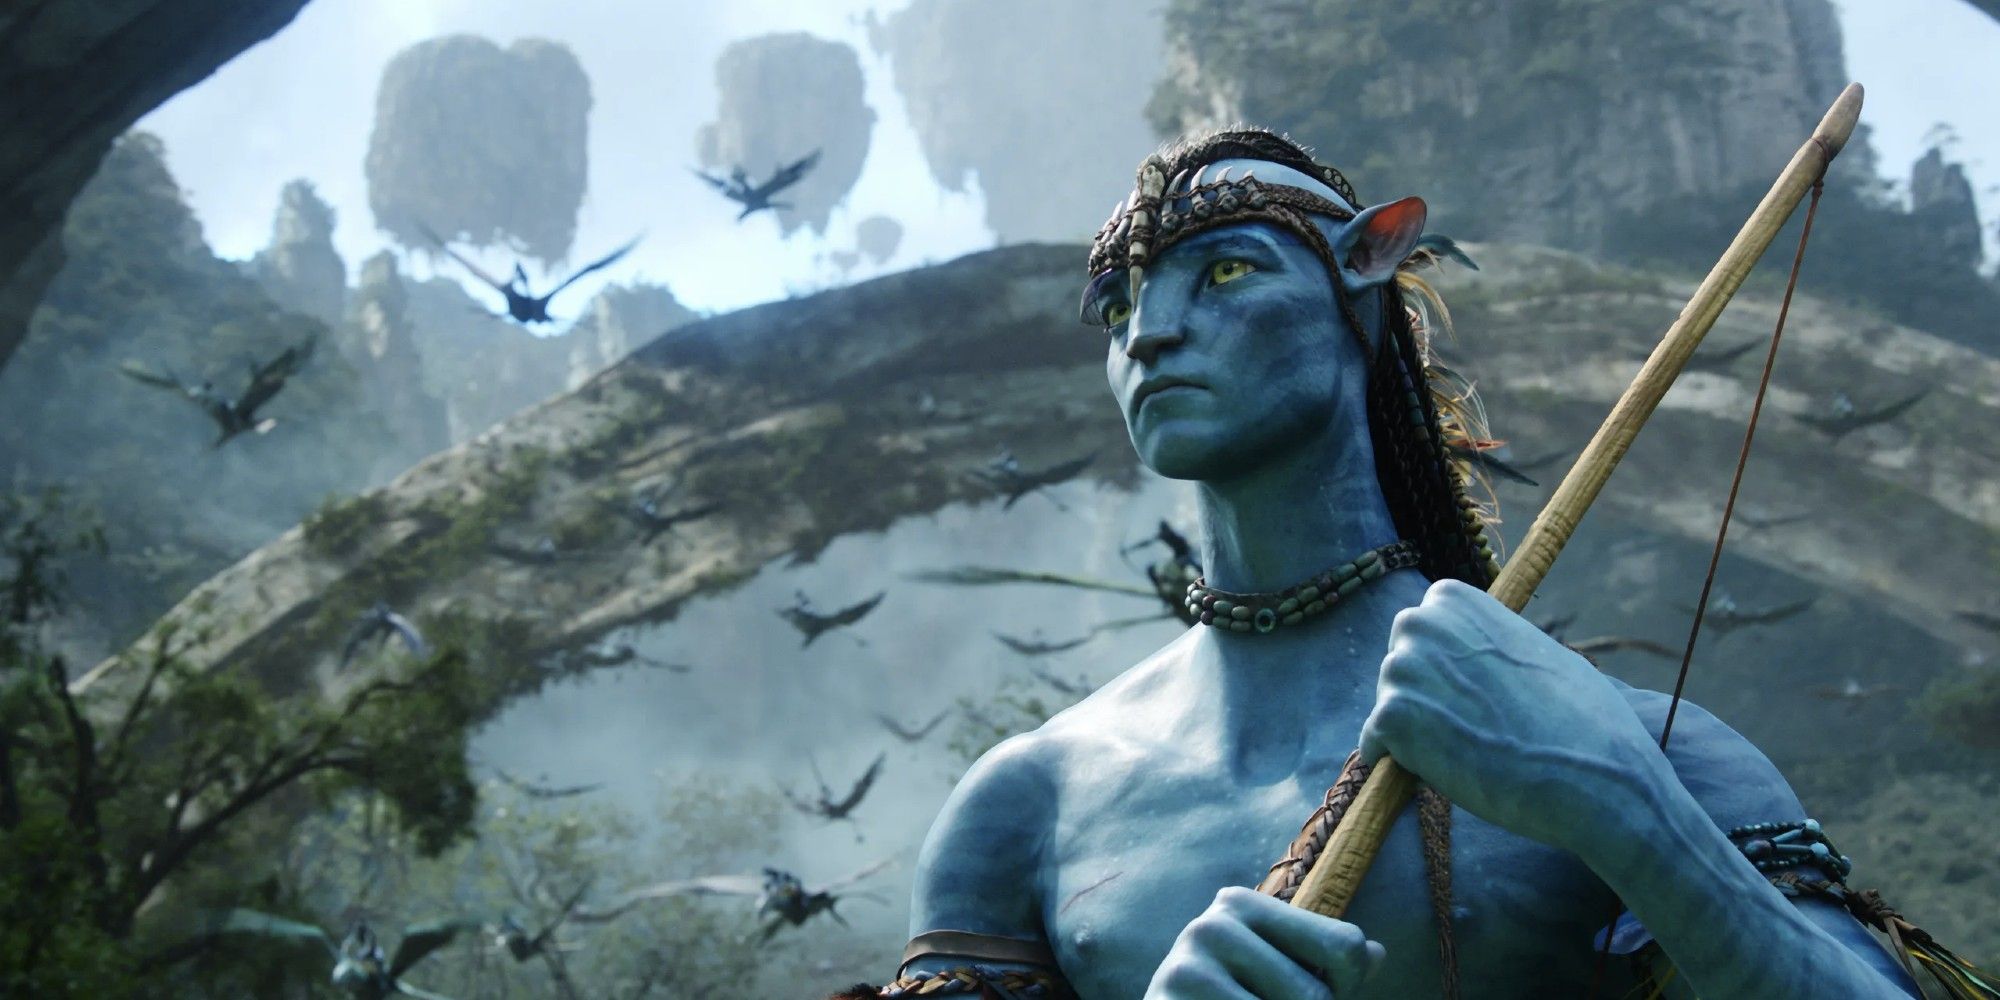 Jake Sully in his Na'vi form looking to the distance in Avatar.